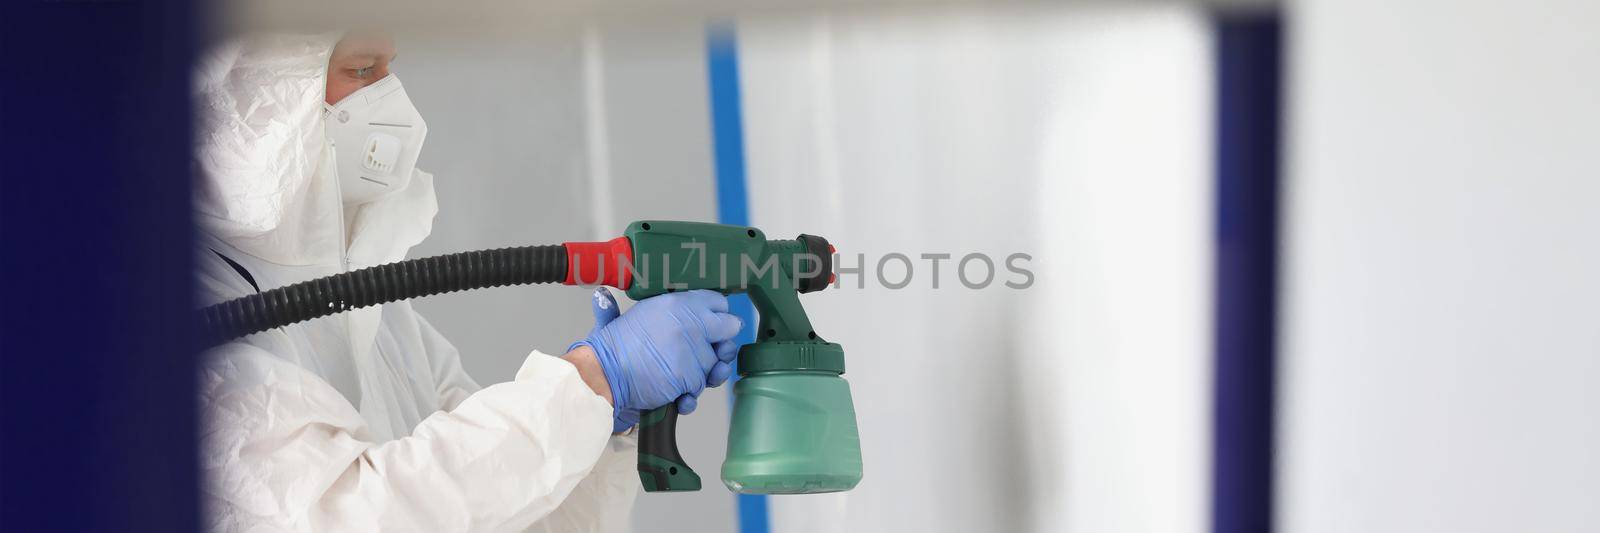 Close-up of worker painting wall with spray gun in white colour. Effective way to paint walls. Renovation, construction, interior design, household repair concept